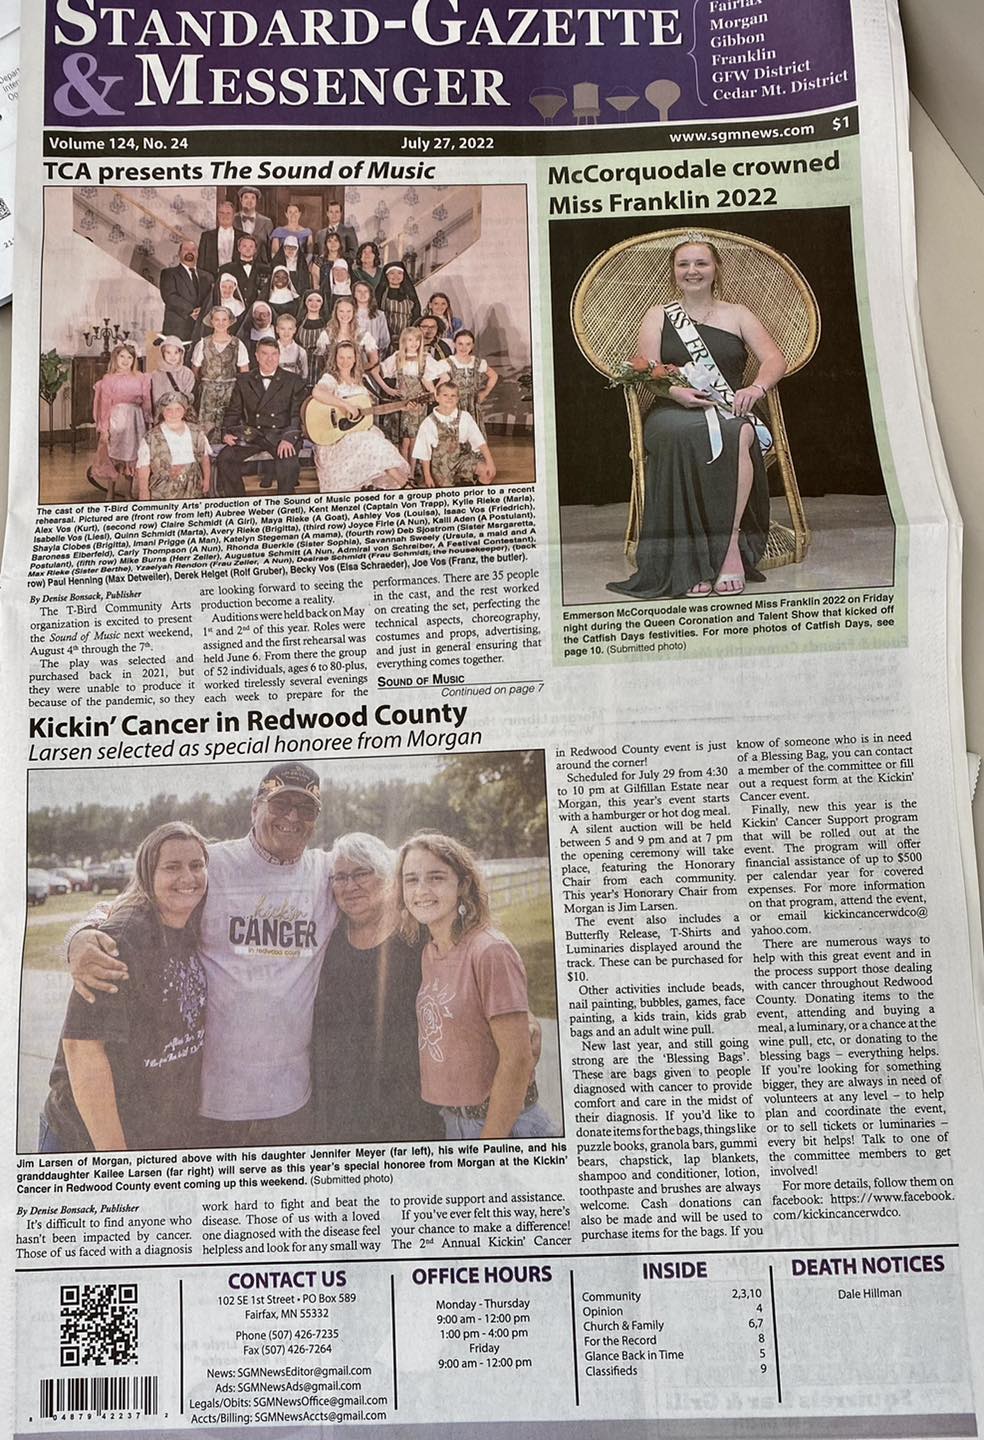 The front page of the Standard Gazette and Messenger featuring the 2nd Annual Kickin' Cancer Event.